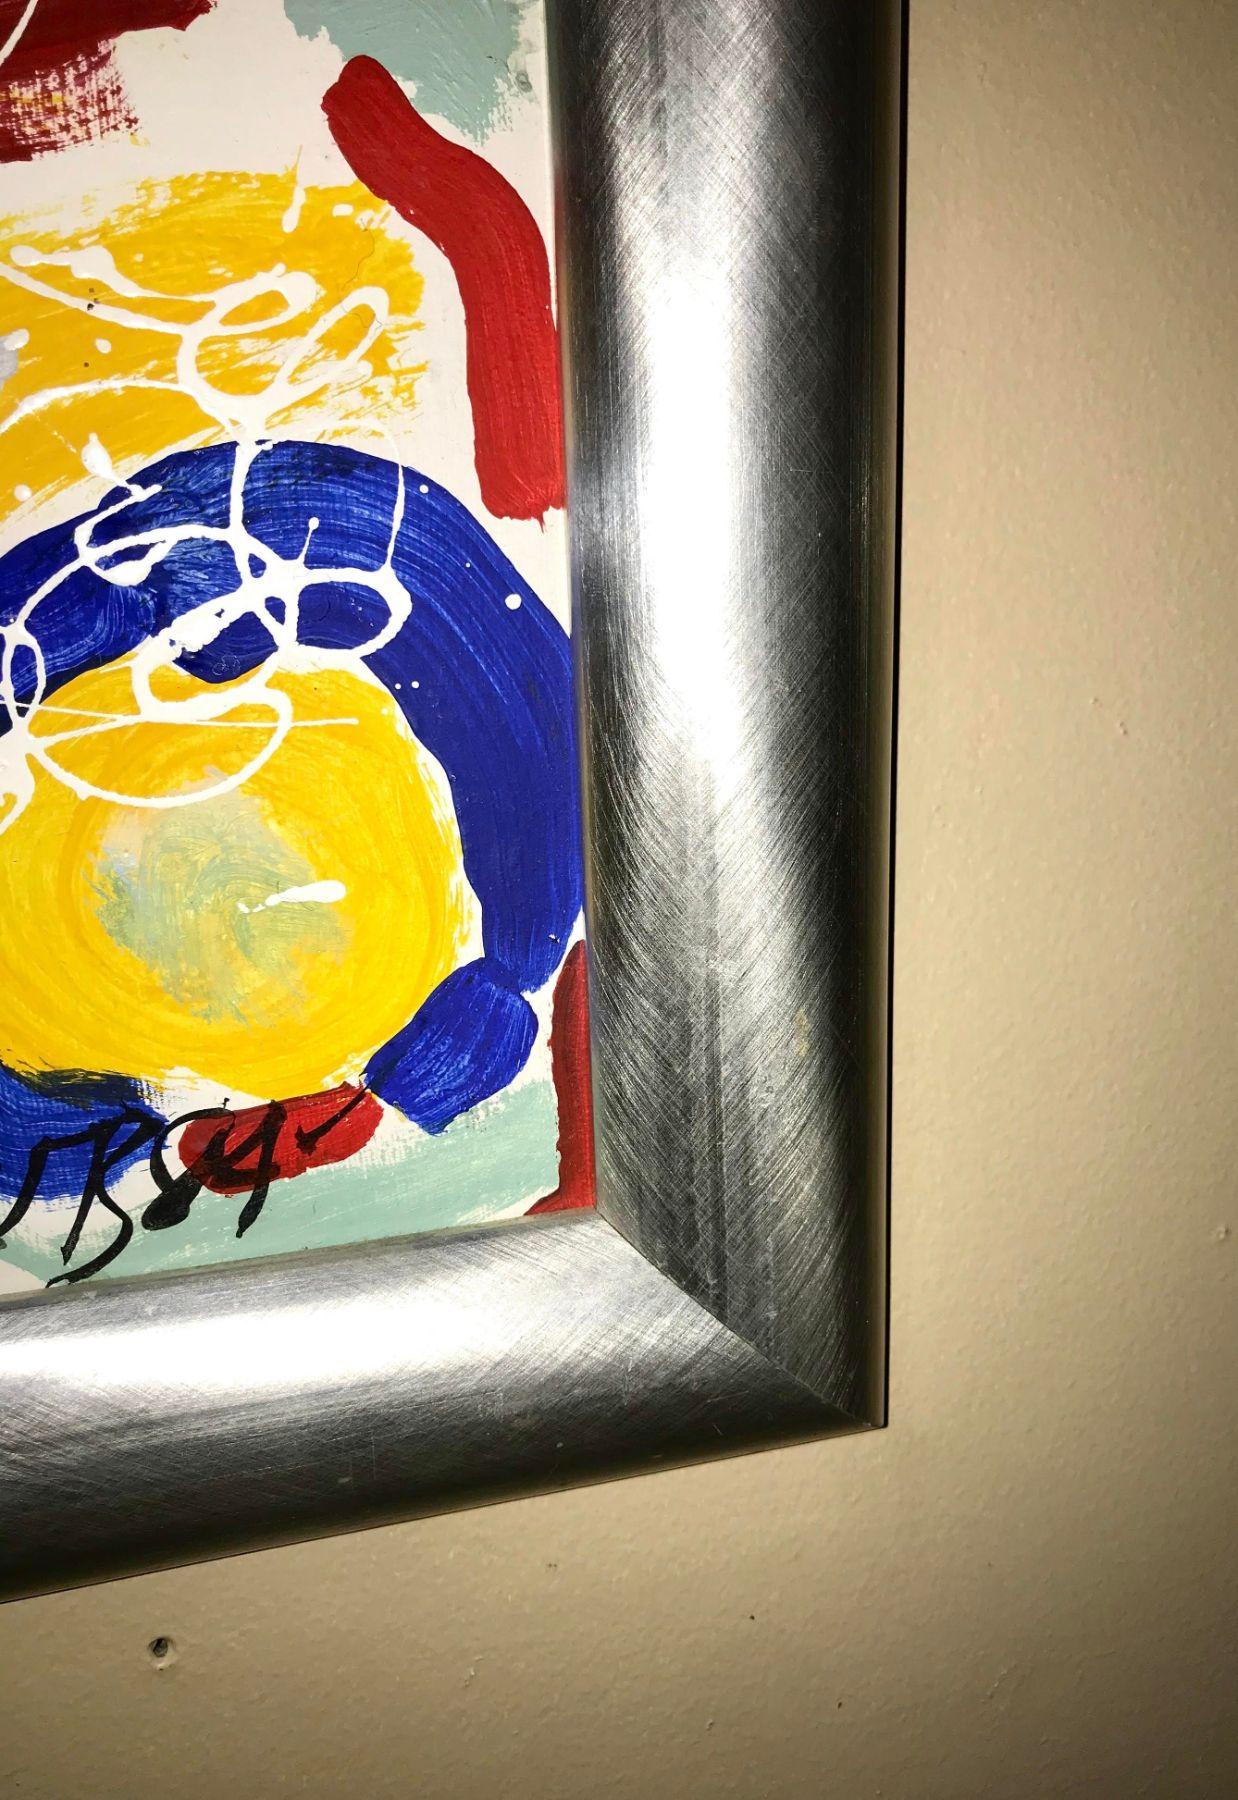 Abstract Oil on Canvas Painting by Colow B. Dated 1984 In Good Condition For Sale In Stamford, CT